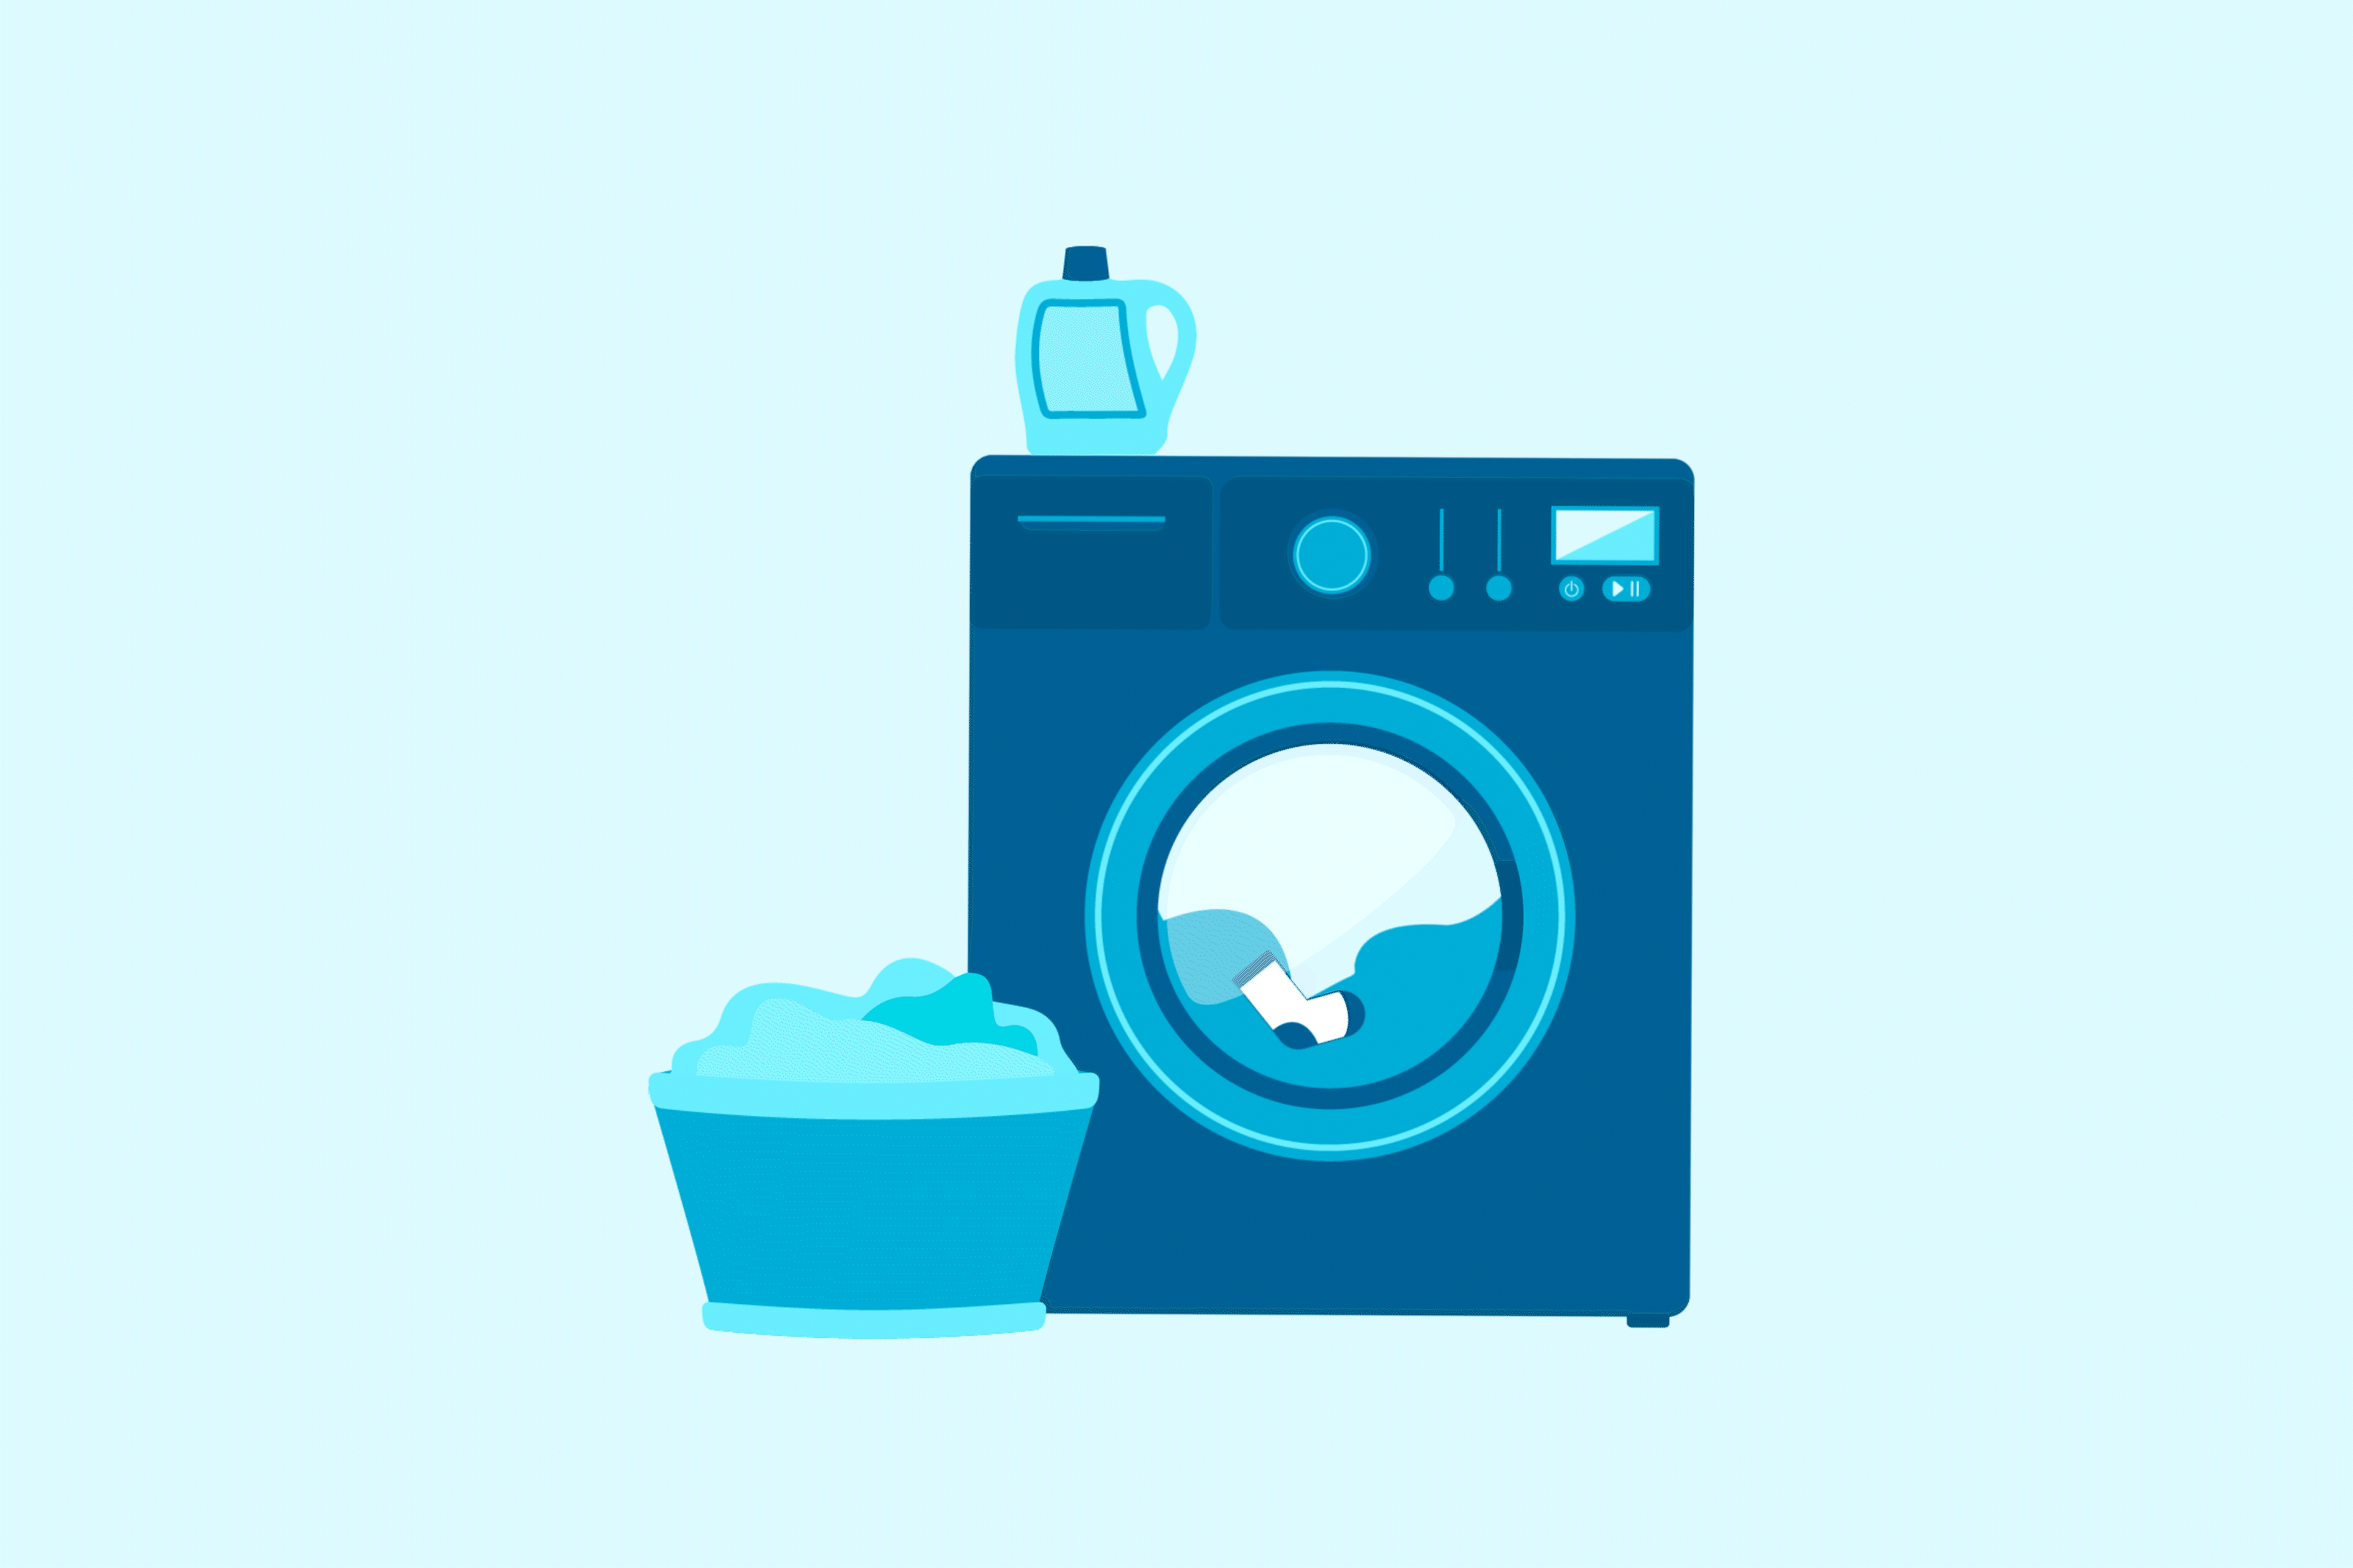 https://www.houselogic.com/wp-content/uploads/2022/09/homemade-cleaning-products-wash-laundry-detergent-washing-machine-ranking-graphic-hero.png